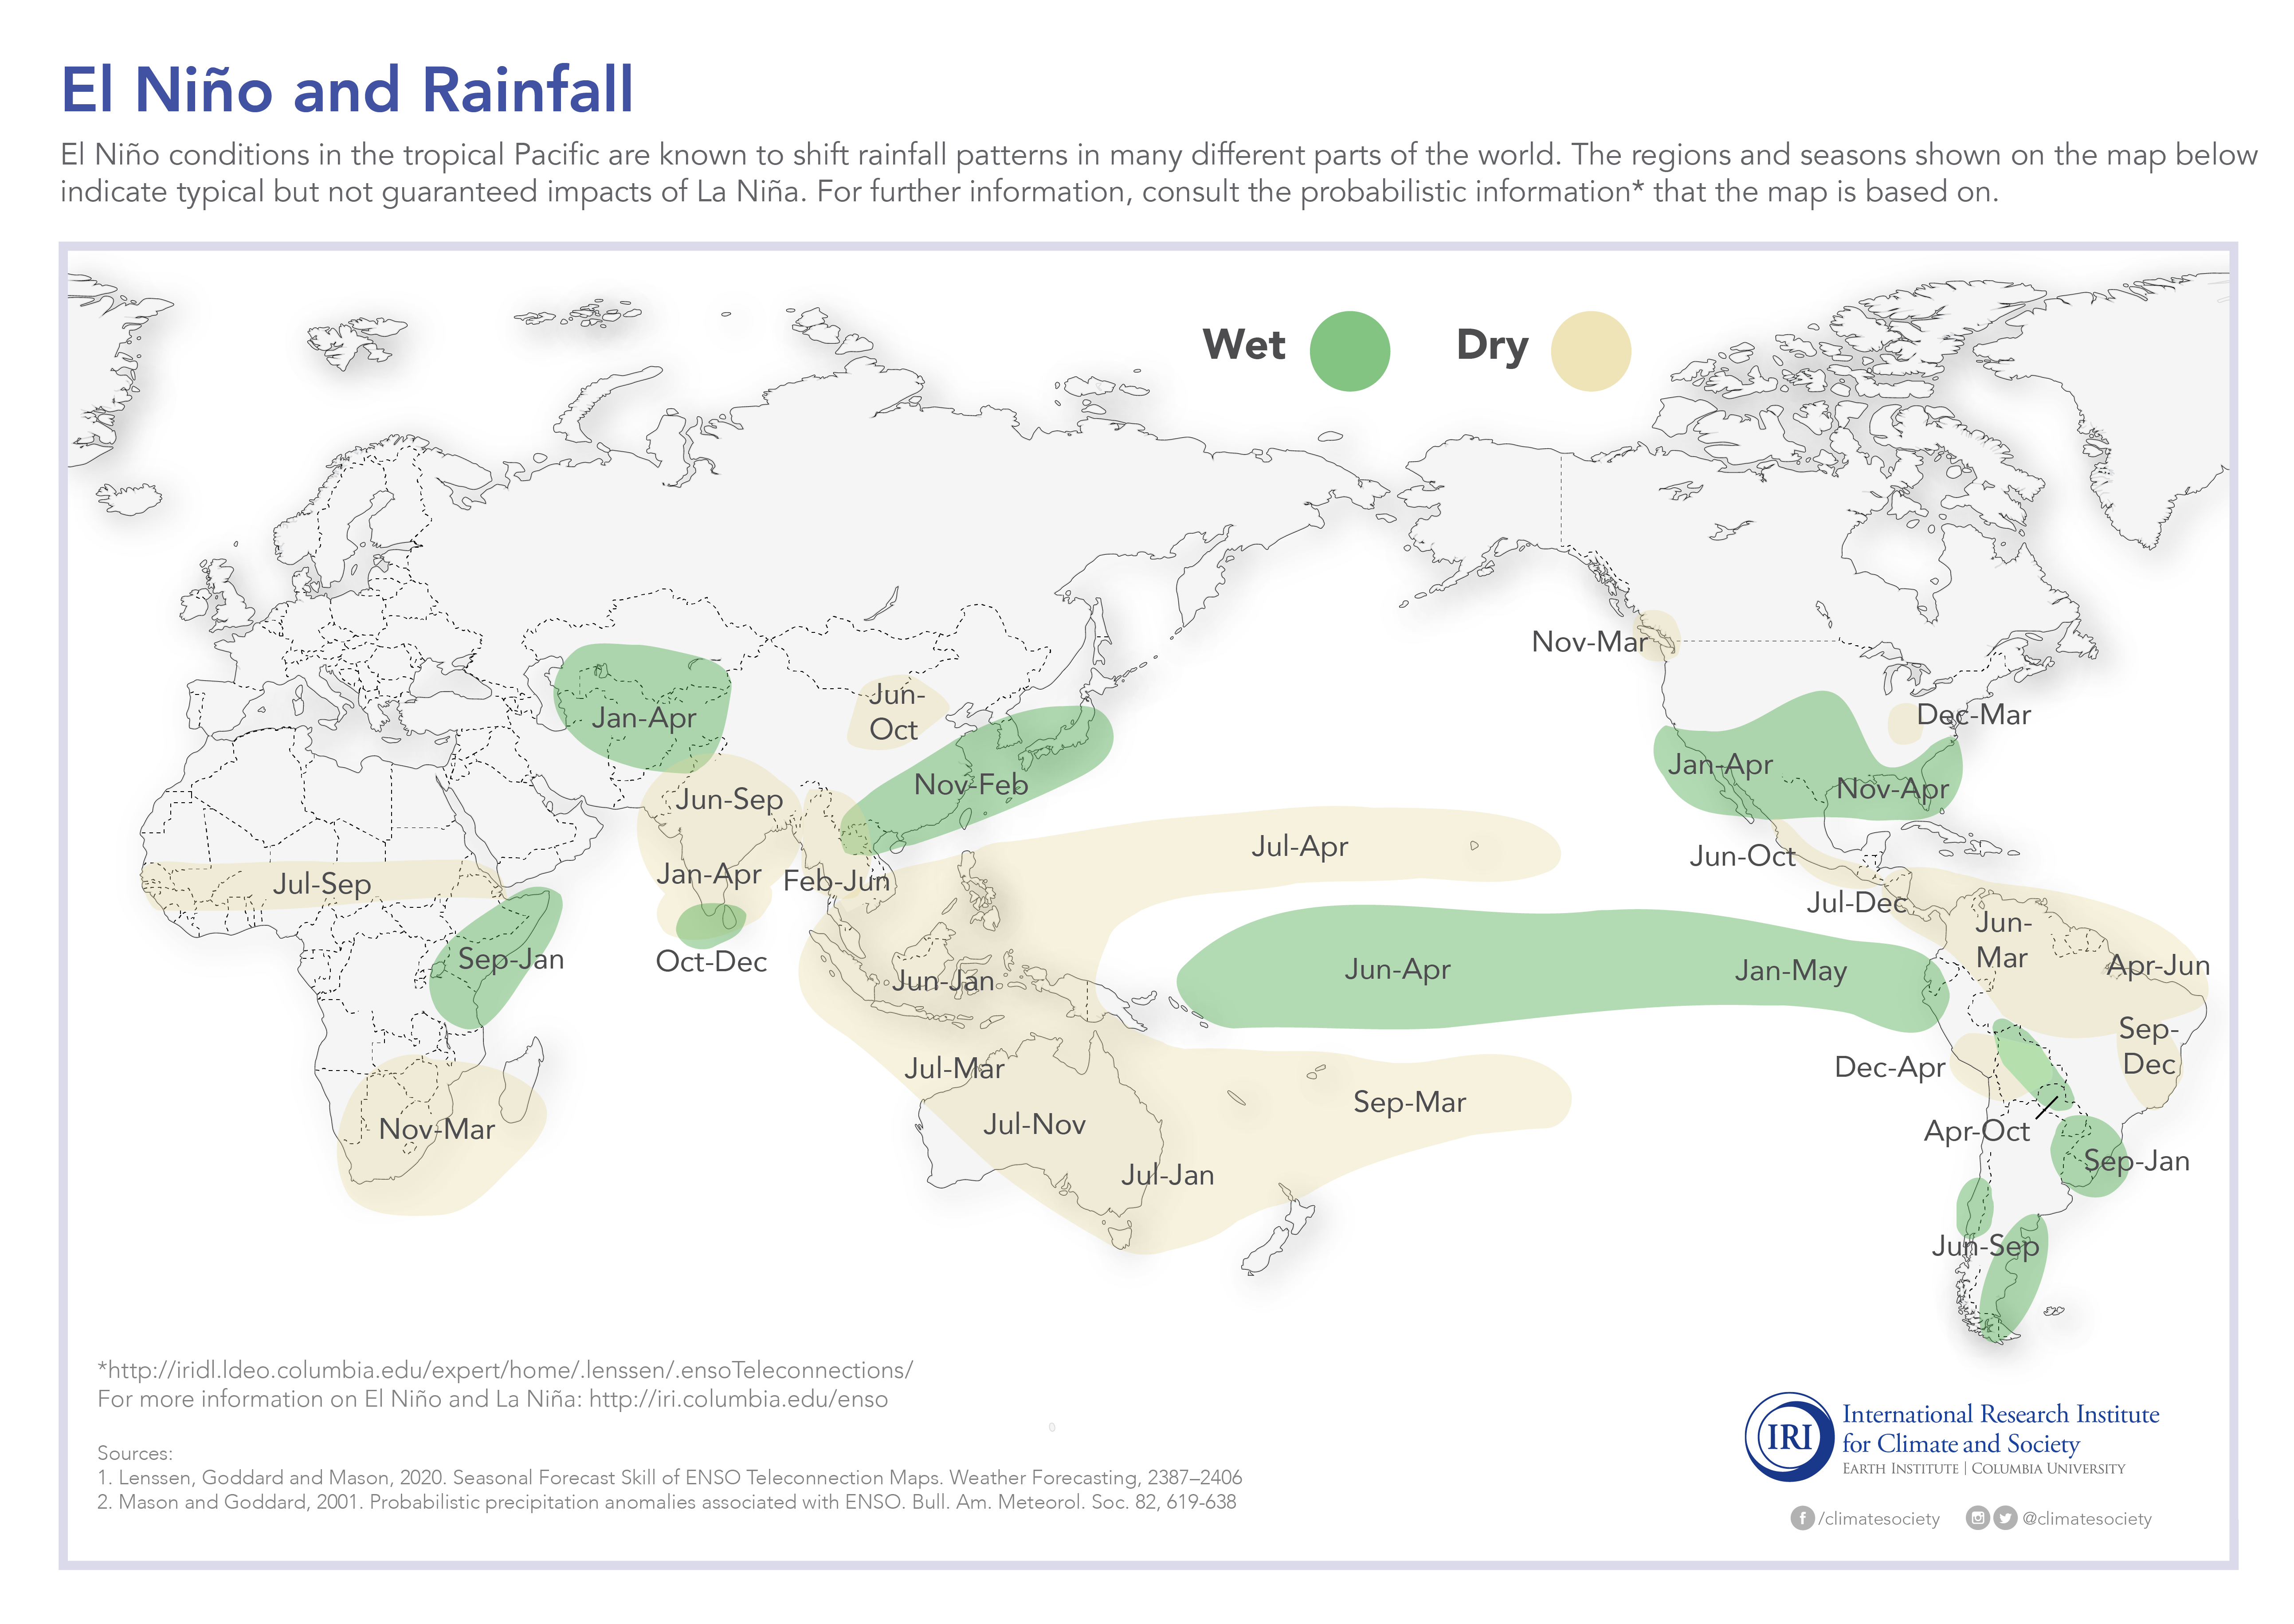 IFRC PIC What Changes in Rainfall are Typical during El Niño and La Niña?